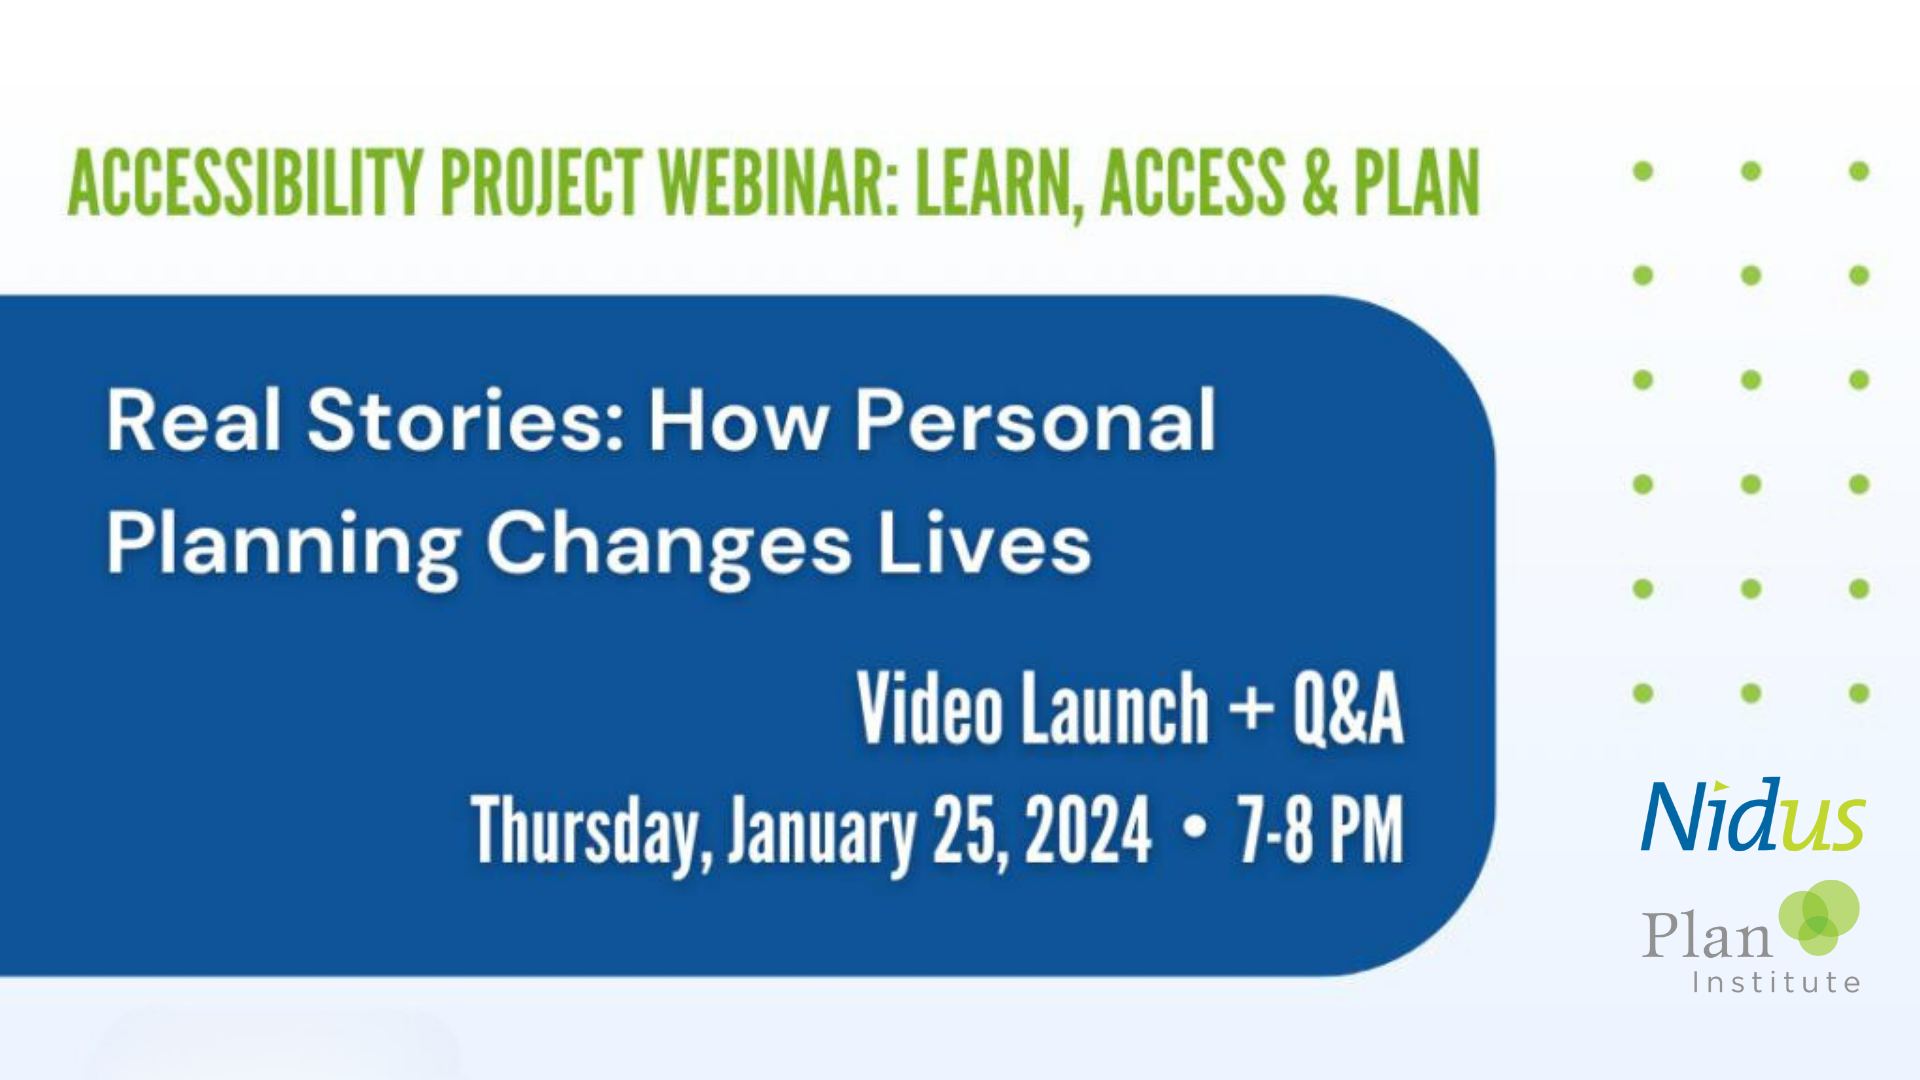 The text reads, Accessibility Project Webinar: Learn, Access, and Plan. Real Stories: How Personal Planning Changes Lives. Video launch and Q&A. Thursday, January 25th, 2024, 7 to 8 PM. The Nidus logo and Plan Institute logo are on the bottom right.